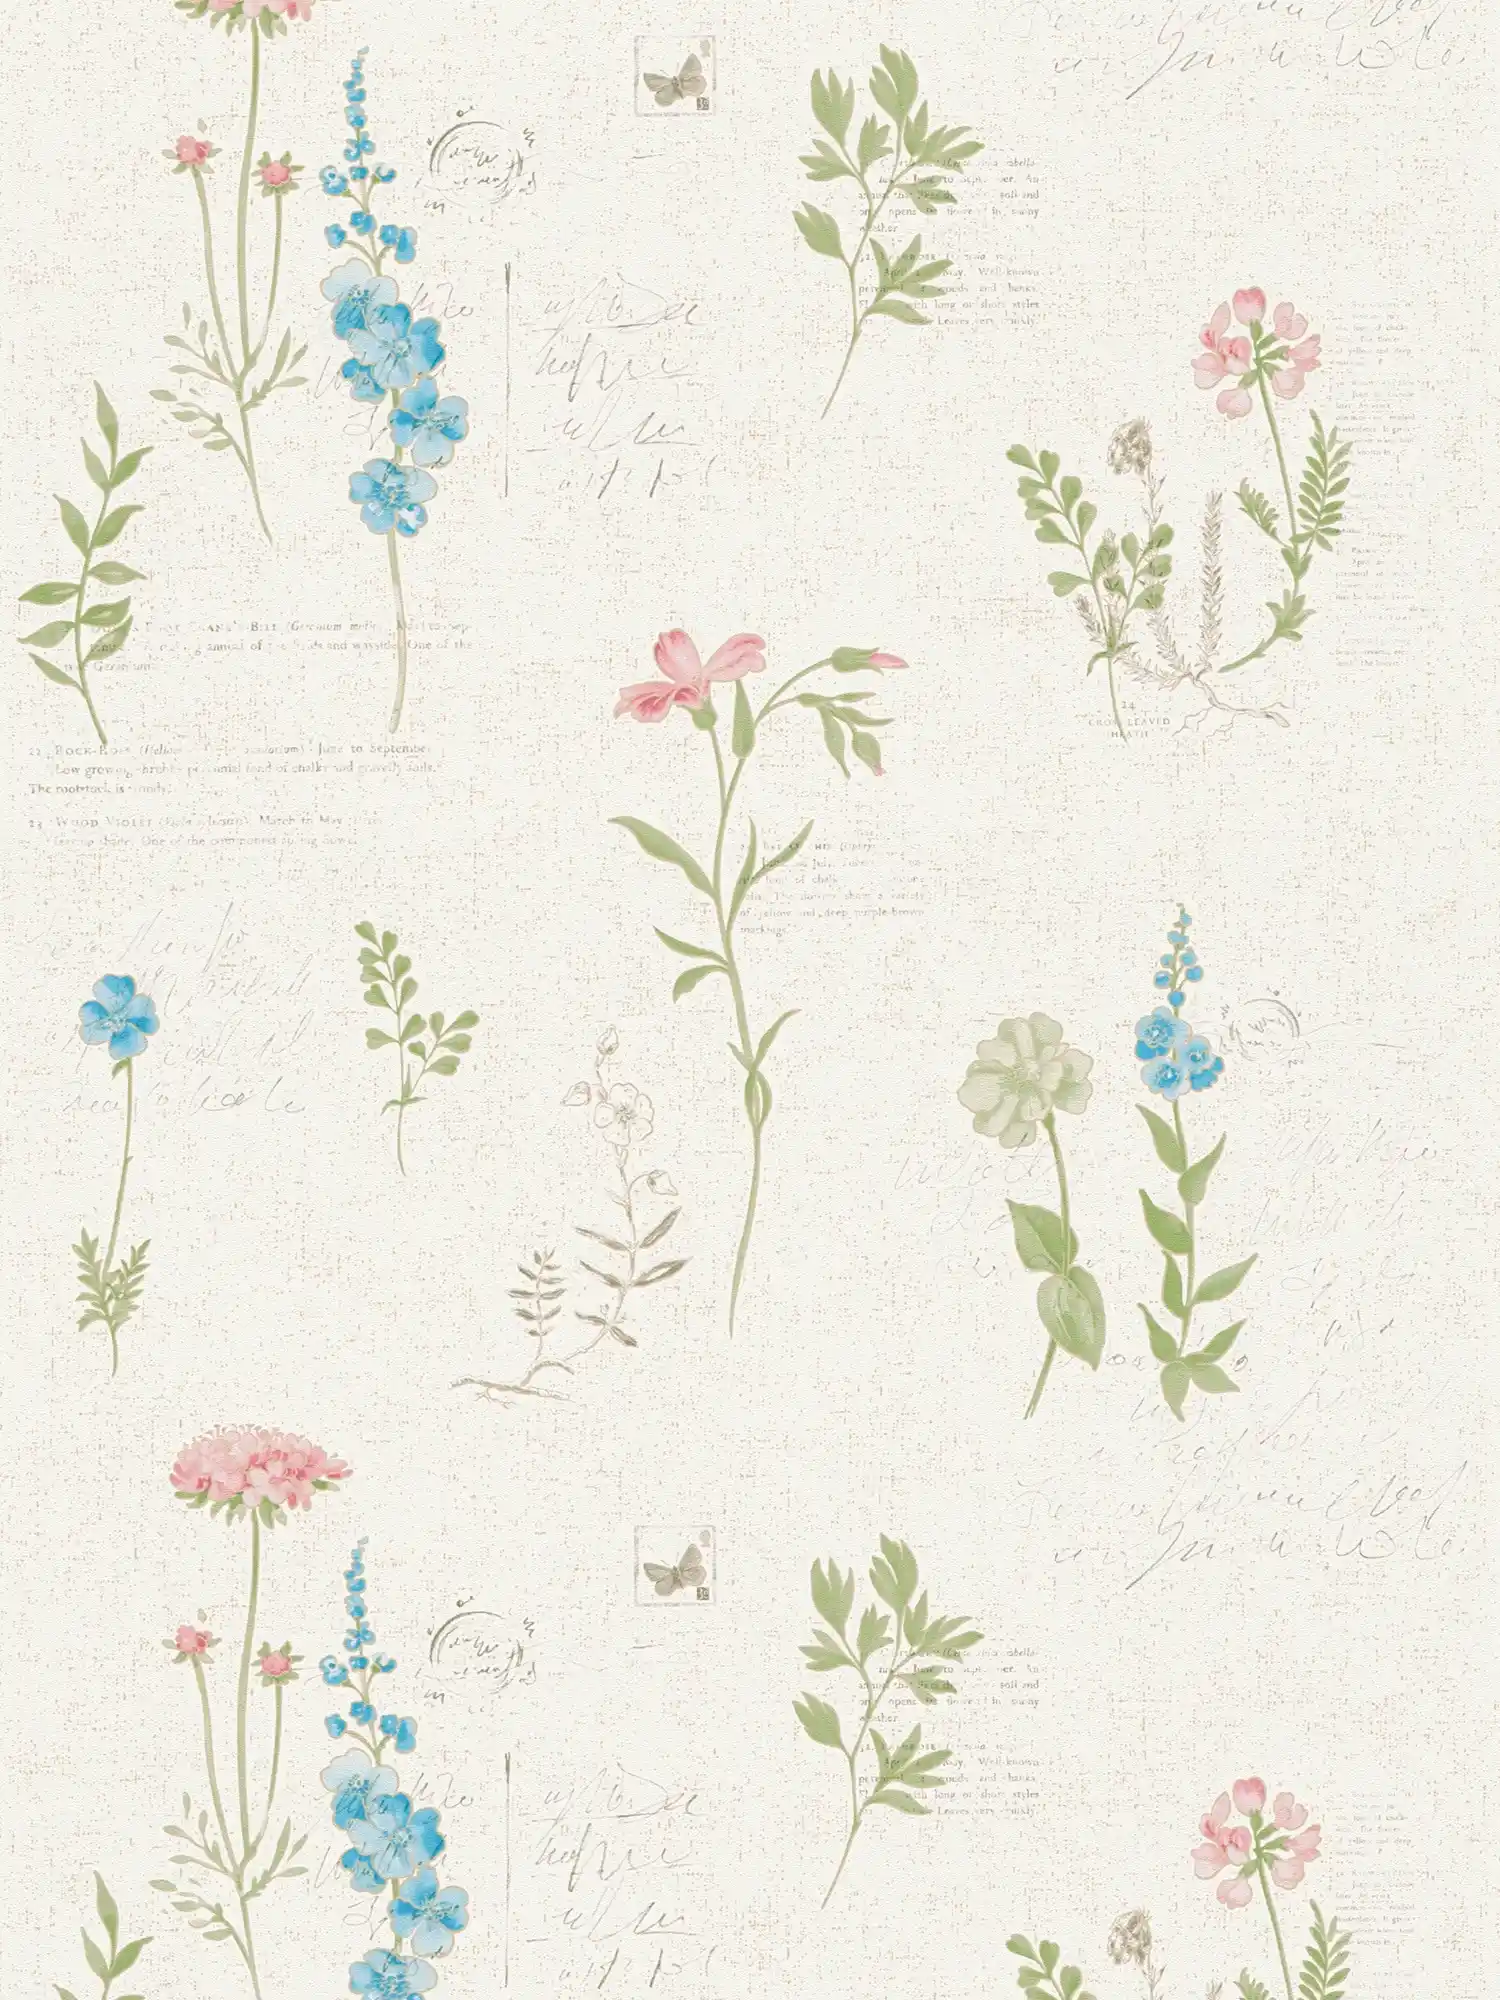         Country house wallpaper with floral pattern and used look - cream
    